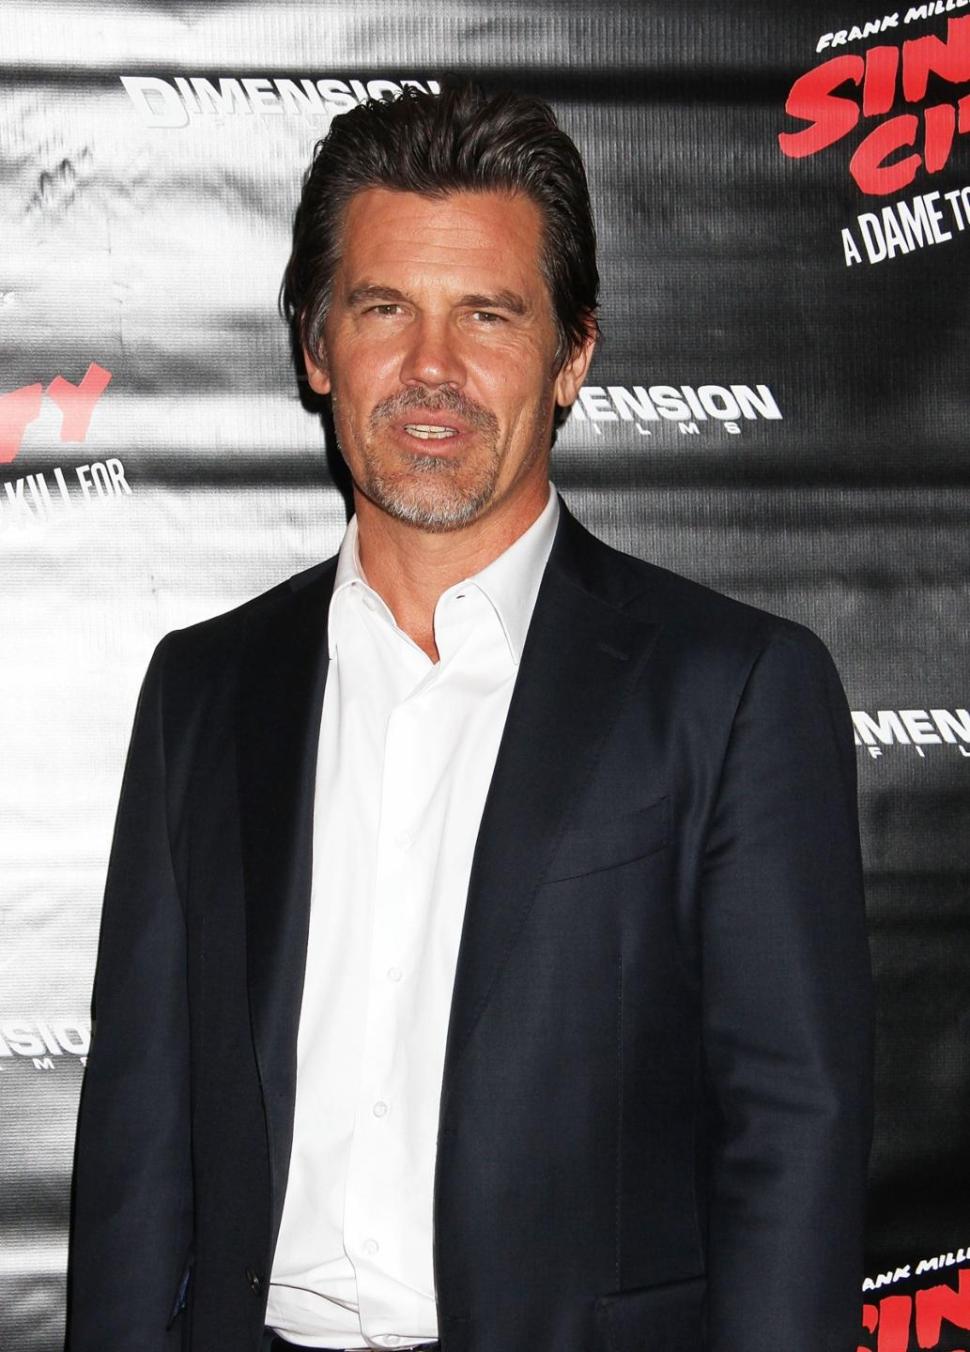 Josh Brolin and his family have ‘offered help and support and we continue to do so,’ a statement said.